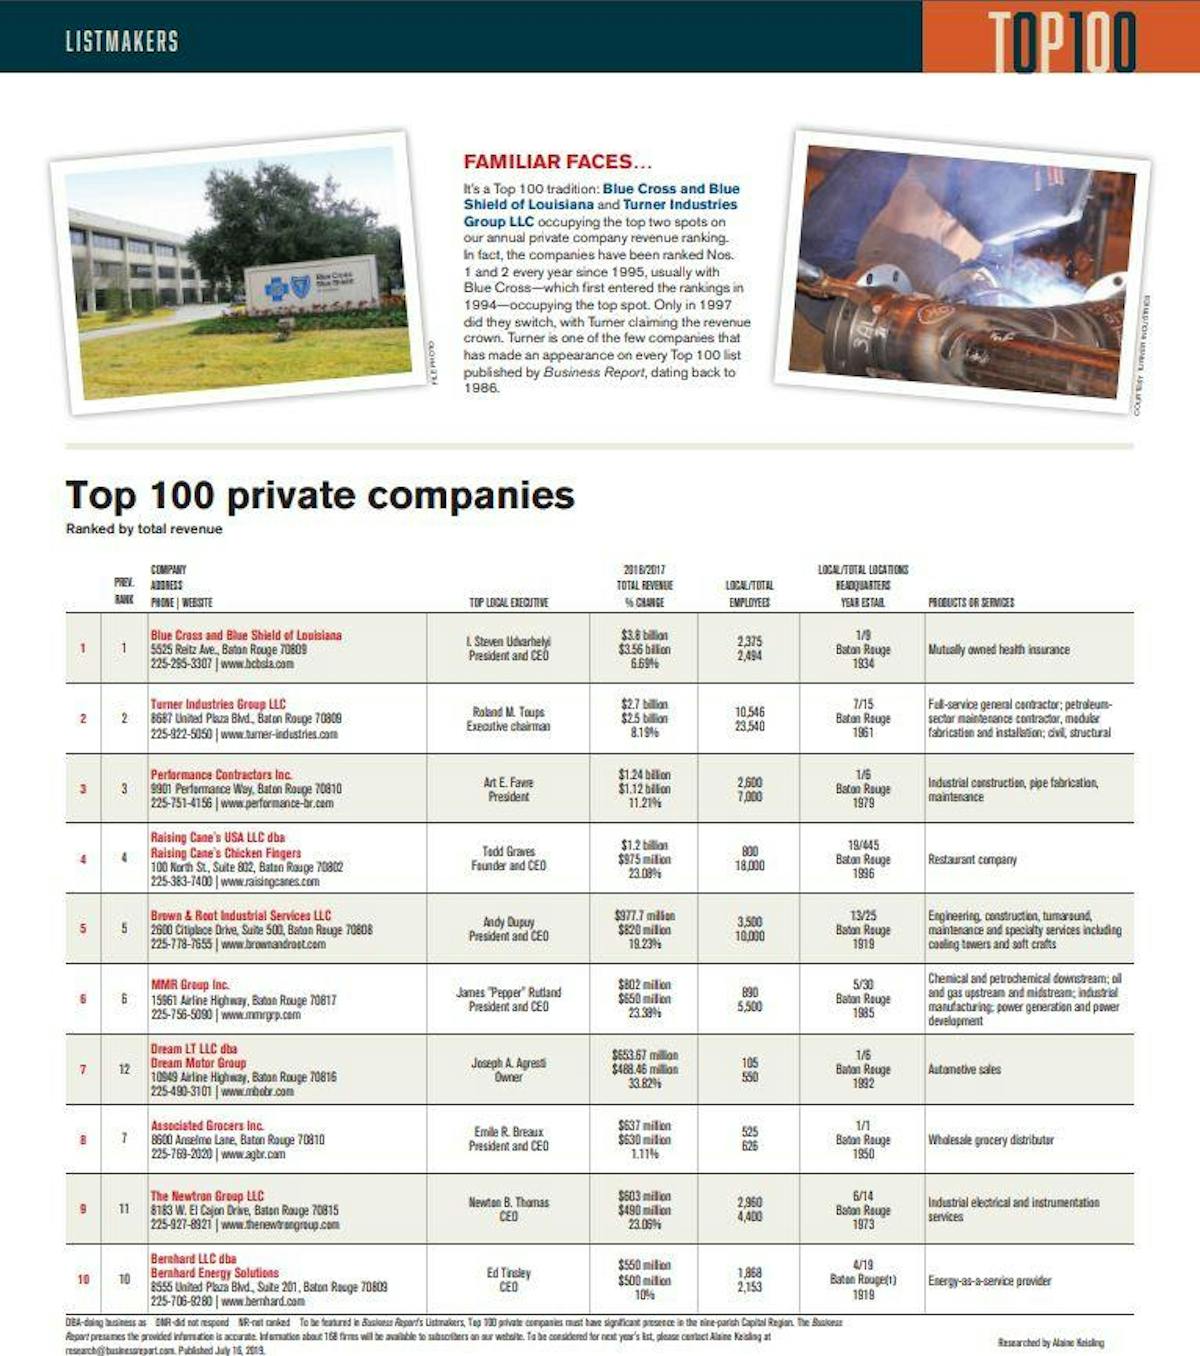 MMR Ranks Sixth in Baton Rouge Business Report Top 100 Private Companies